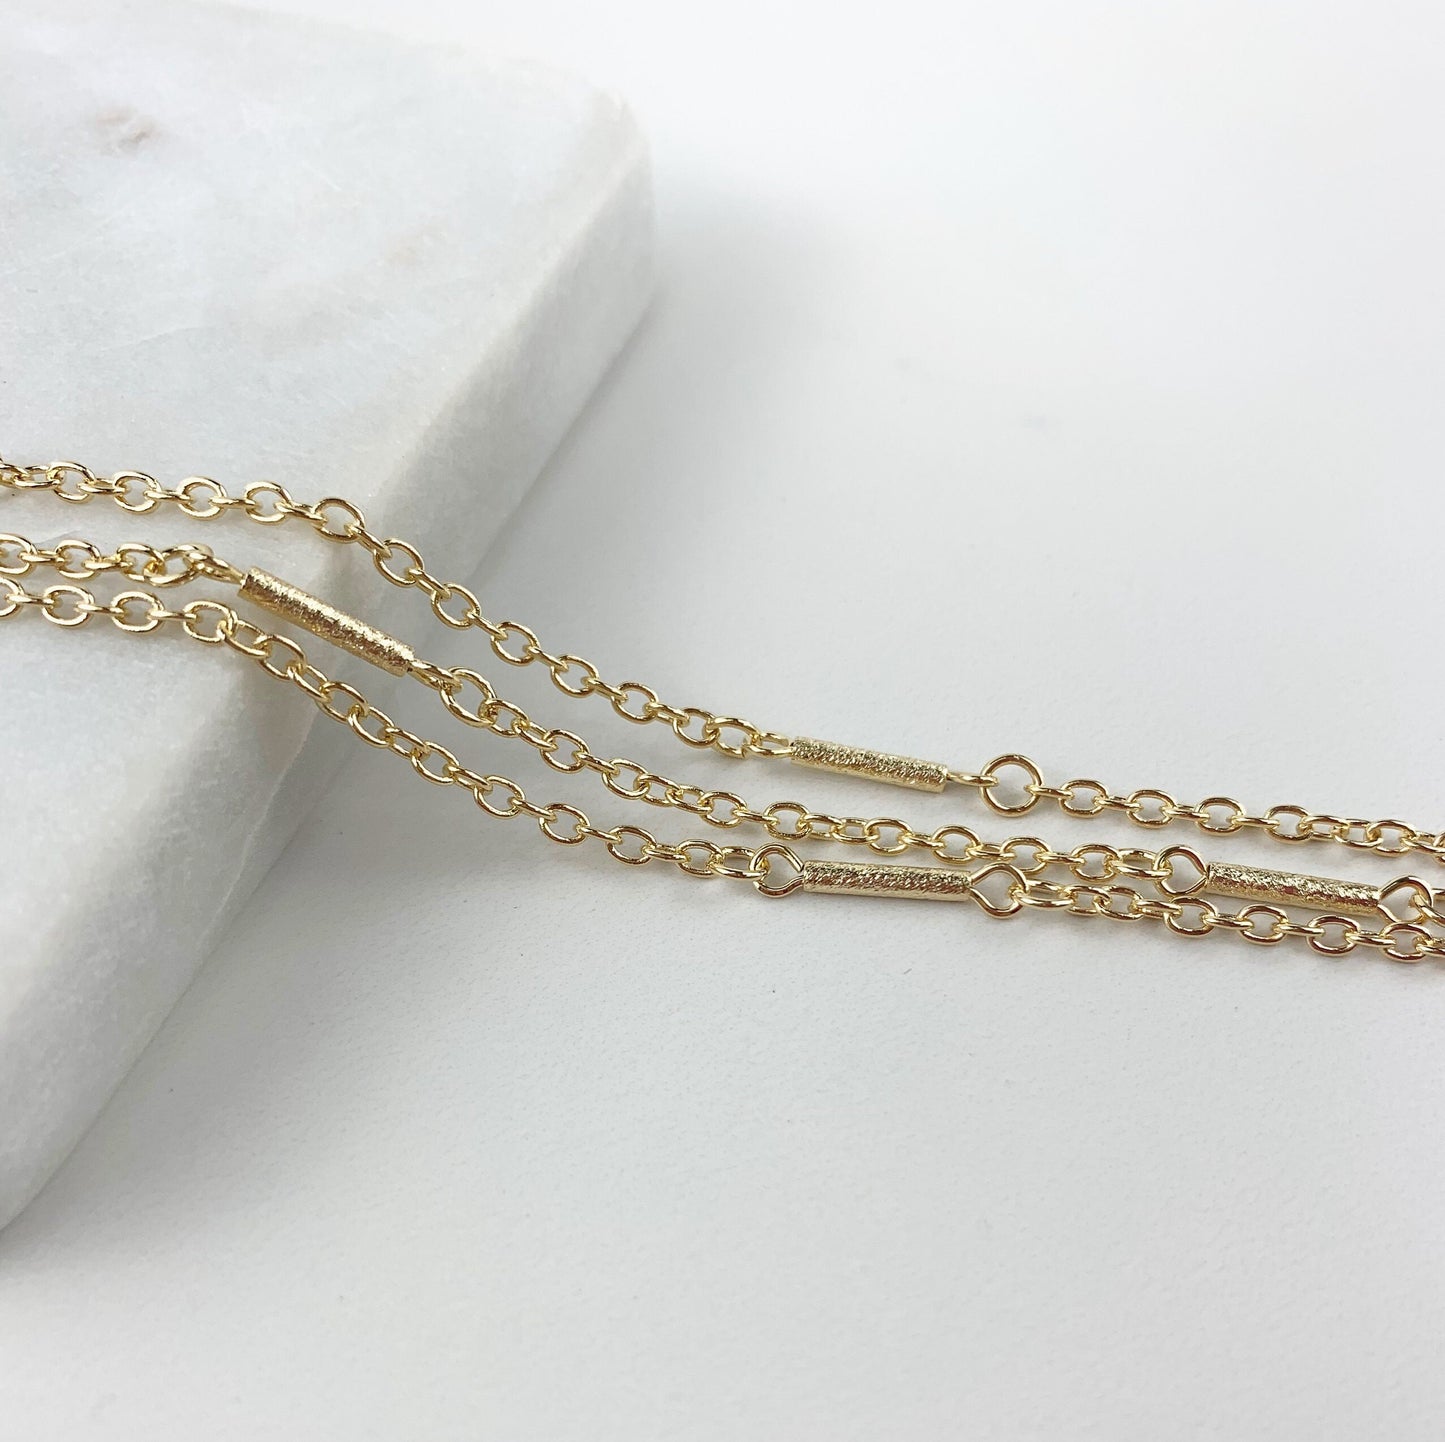 18k Gold Filled 2mm Cable Chain with Three Layers of Chain Anklet Wholesale Jewelry Making Supplies